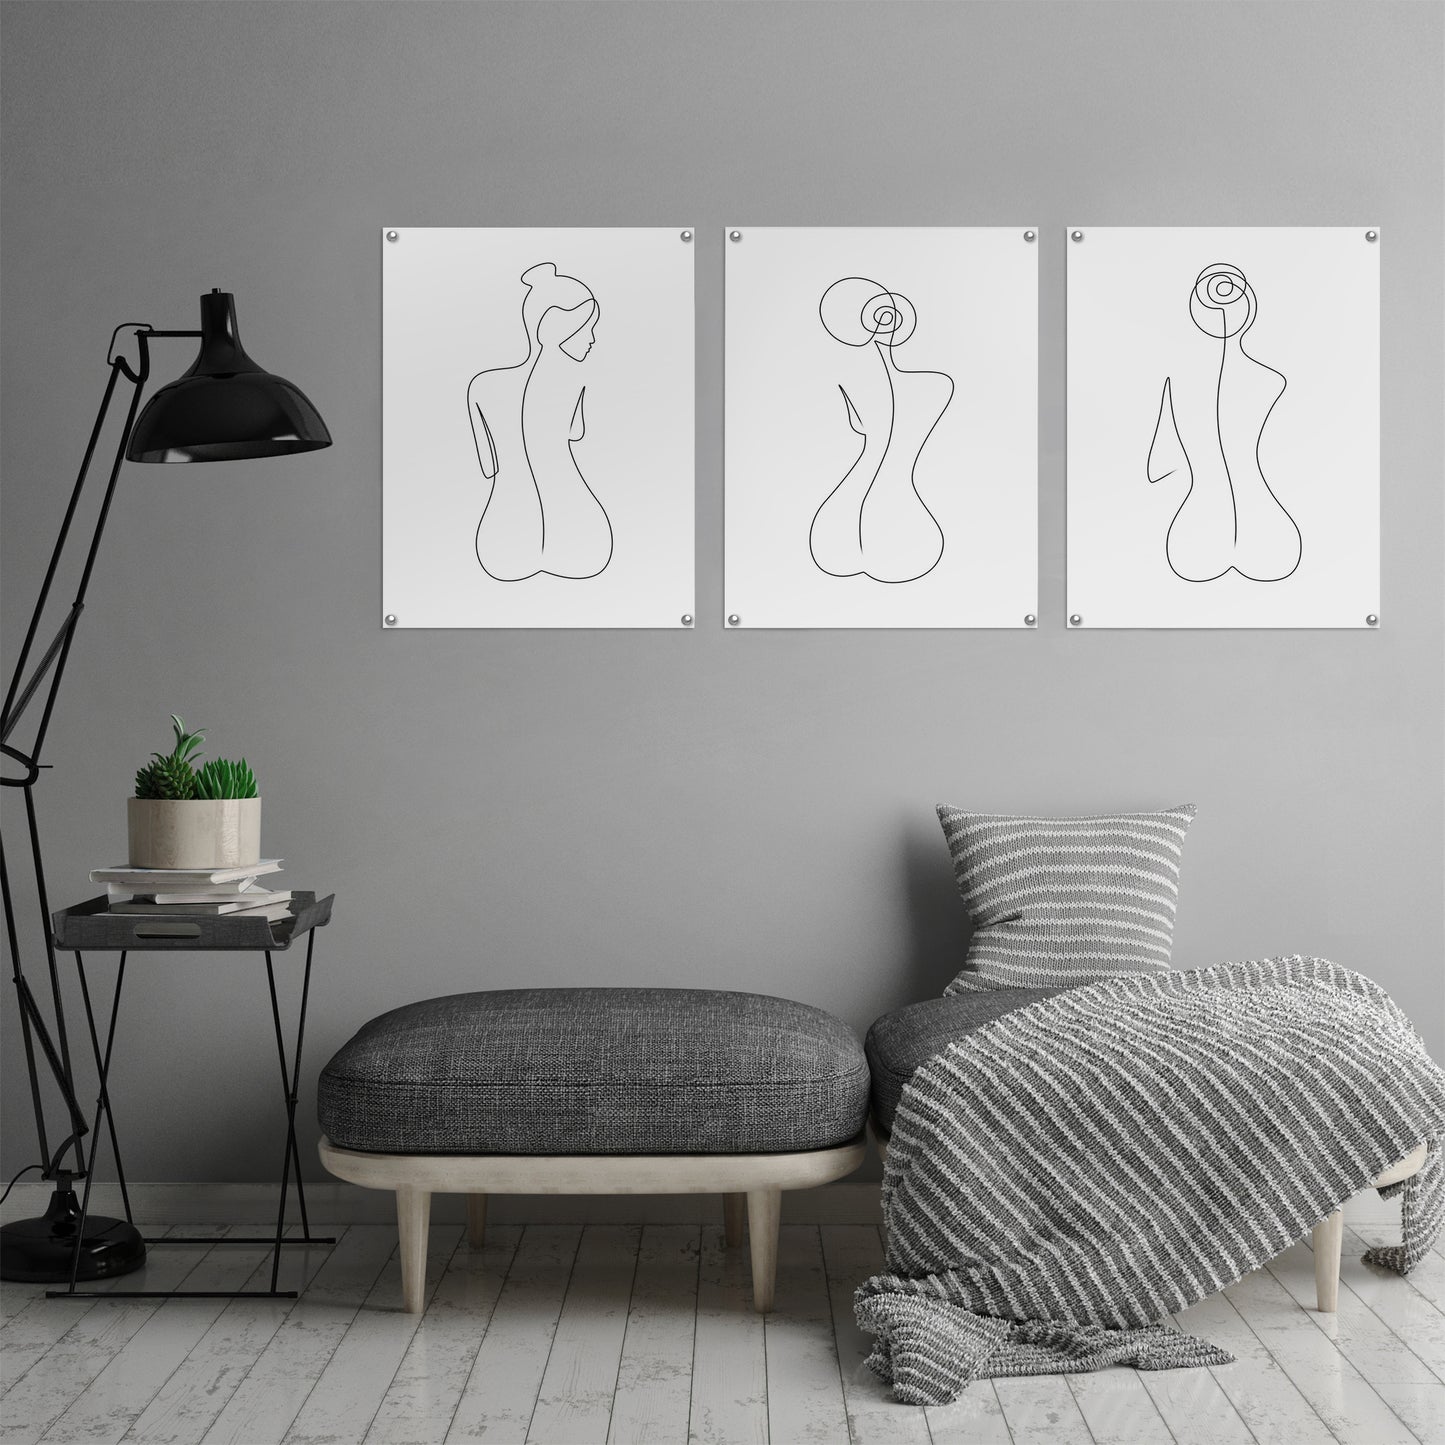 (Set of 3) Triptych Wall Art Abstract Female Shapes by Explicit Design - Poster Print